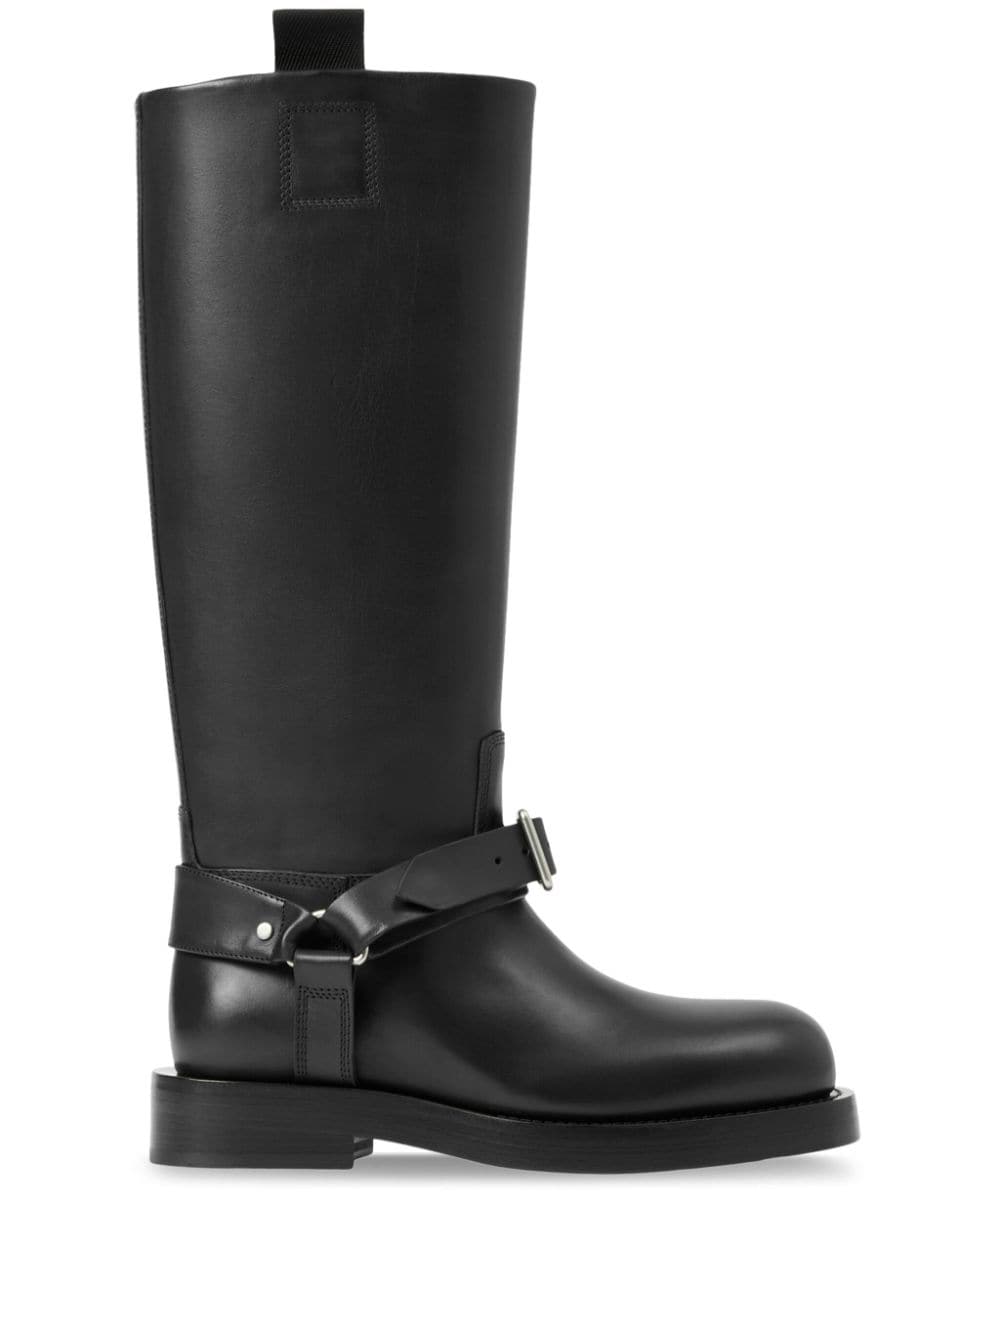 Burberry Saddle knee-high Leather Boots - Farfetch